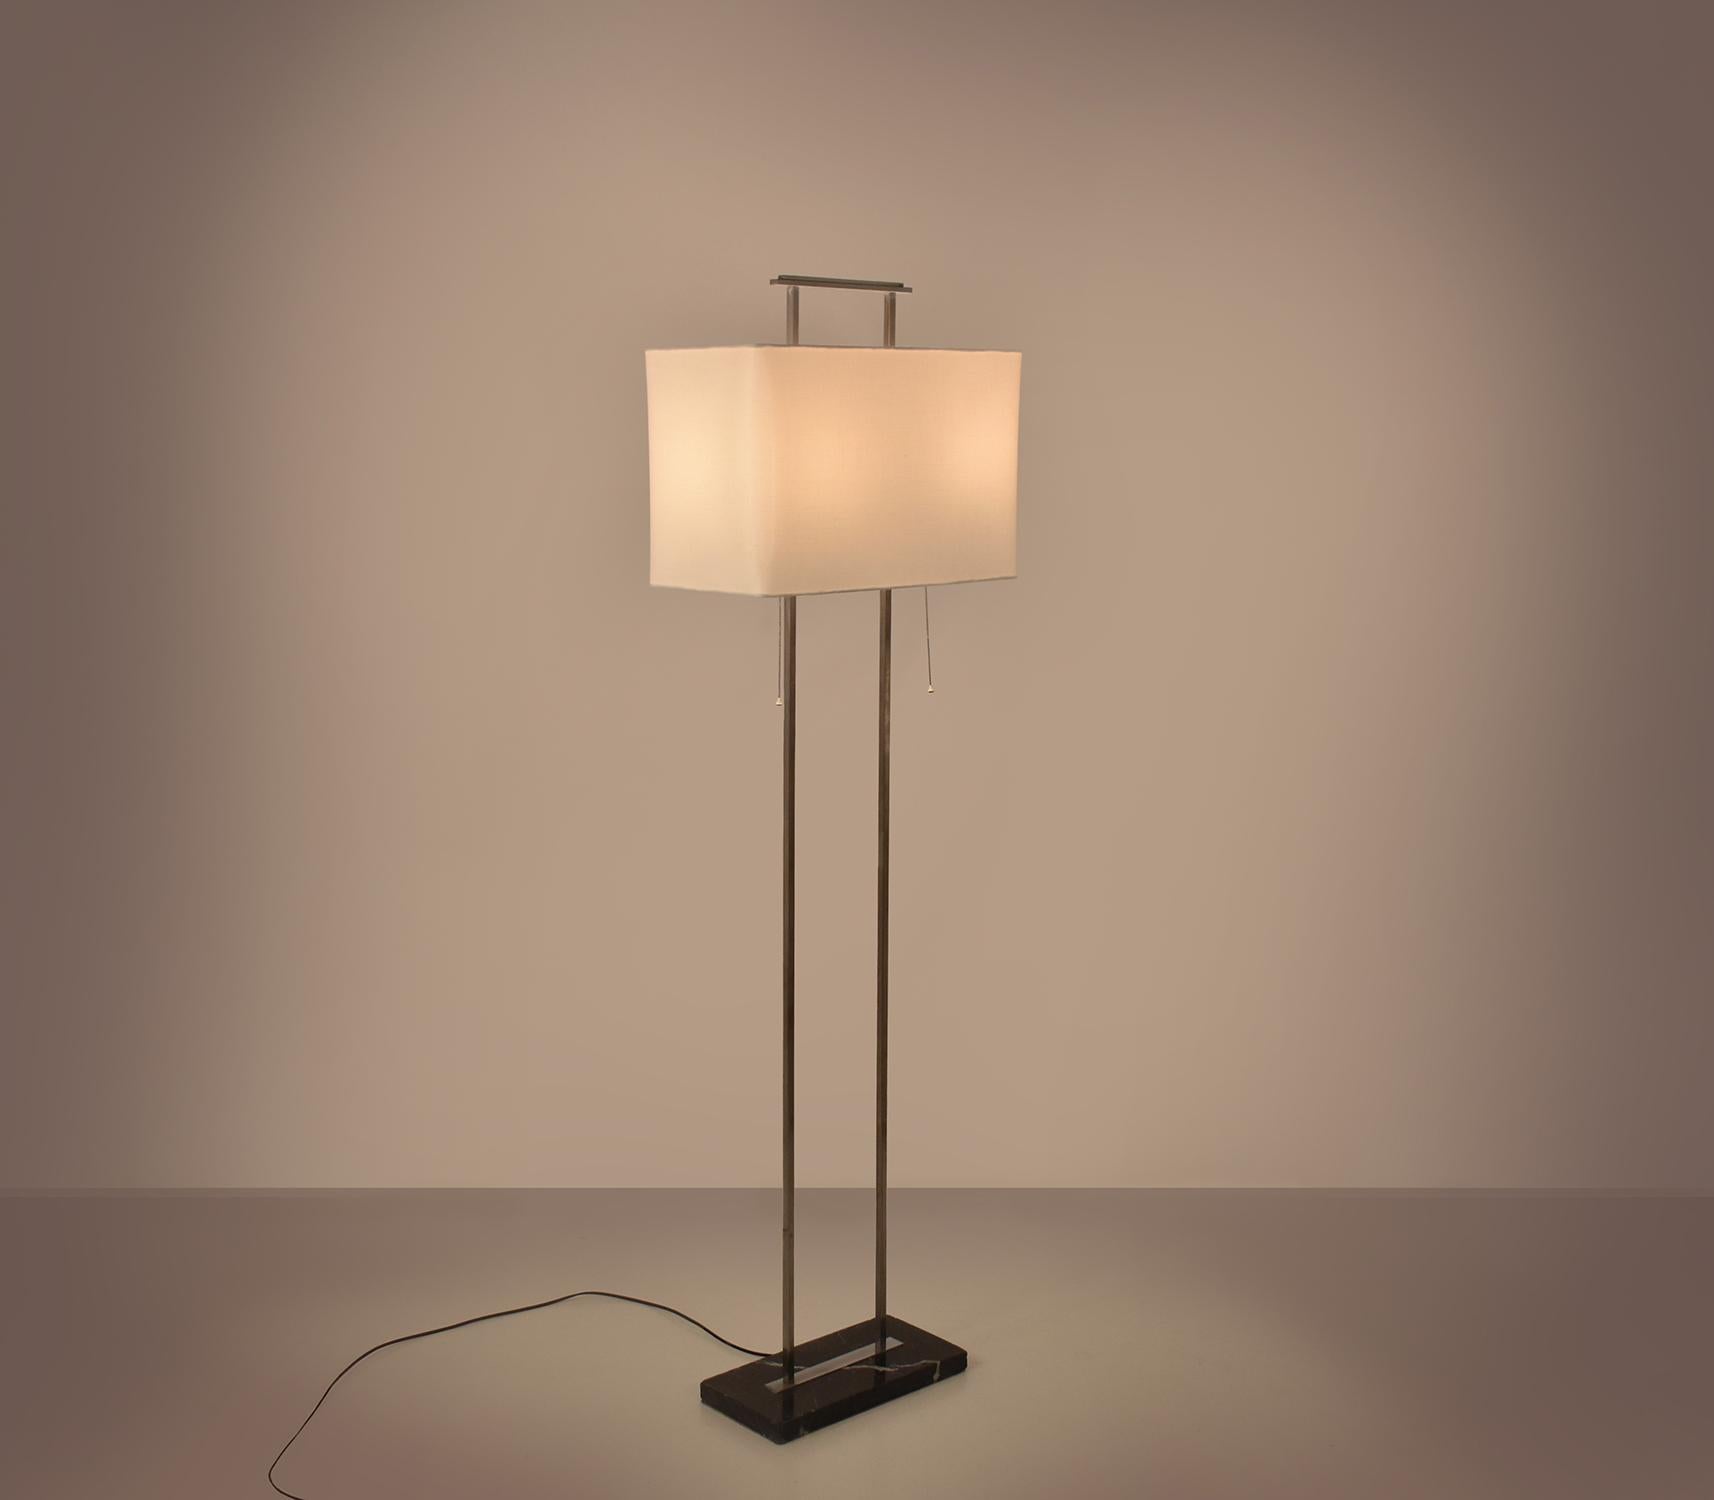 Mid - Century Spanish floor lamp.
Rectangular base in black marble and structure consisting of two pieces in chromed metal. Which protrude from the screen and join at the top.
New lampshade made of raw colored thread and rectangular shape. The new